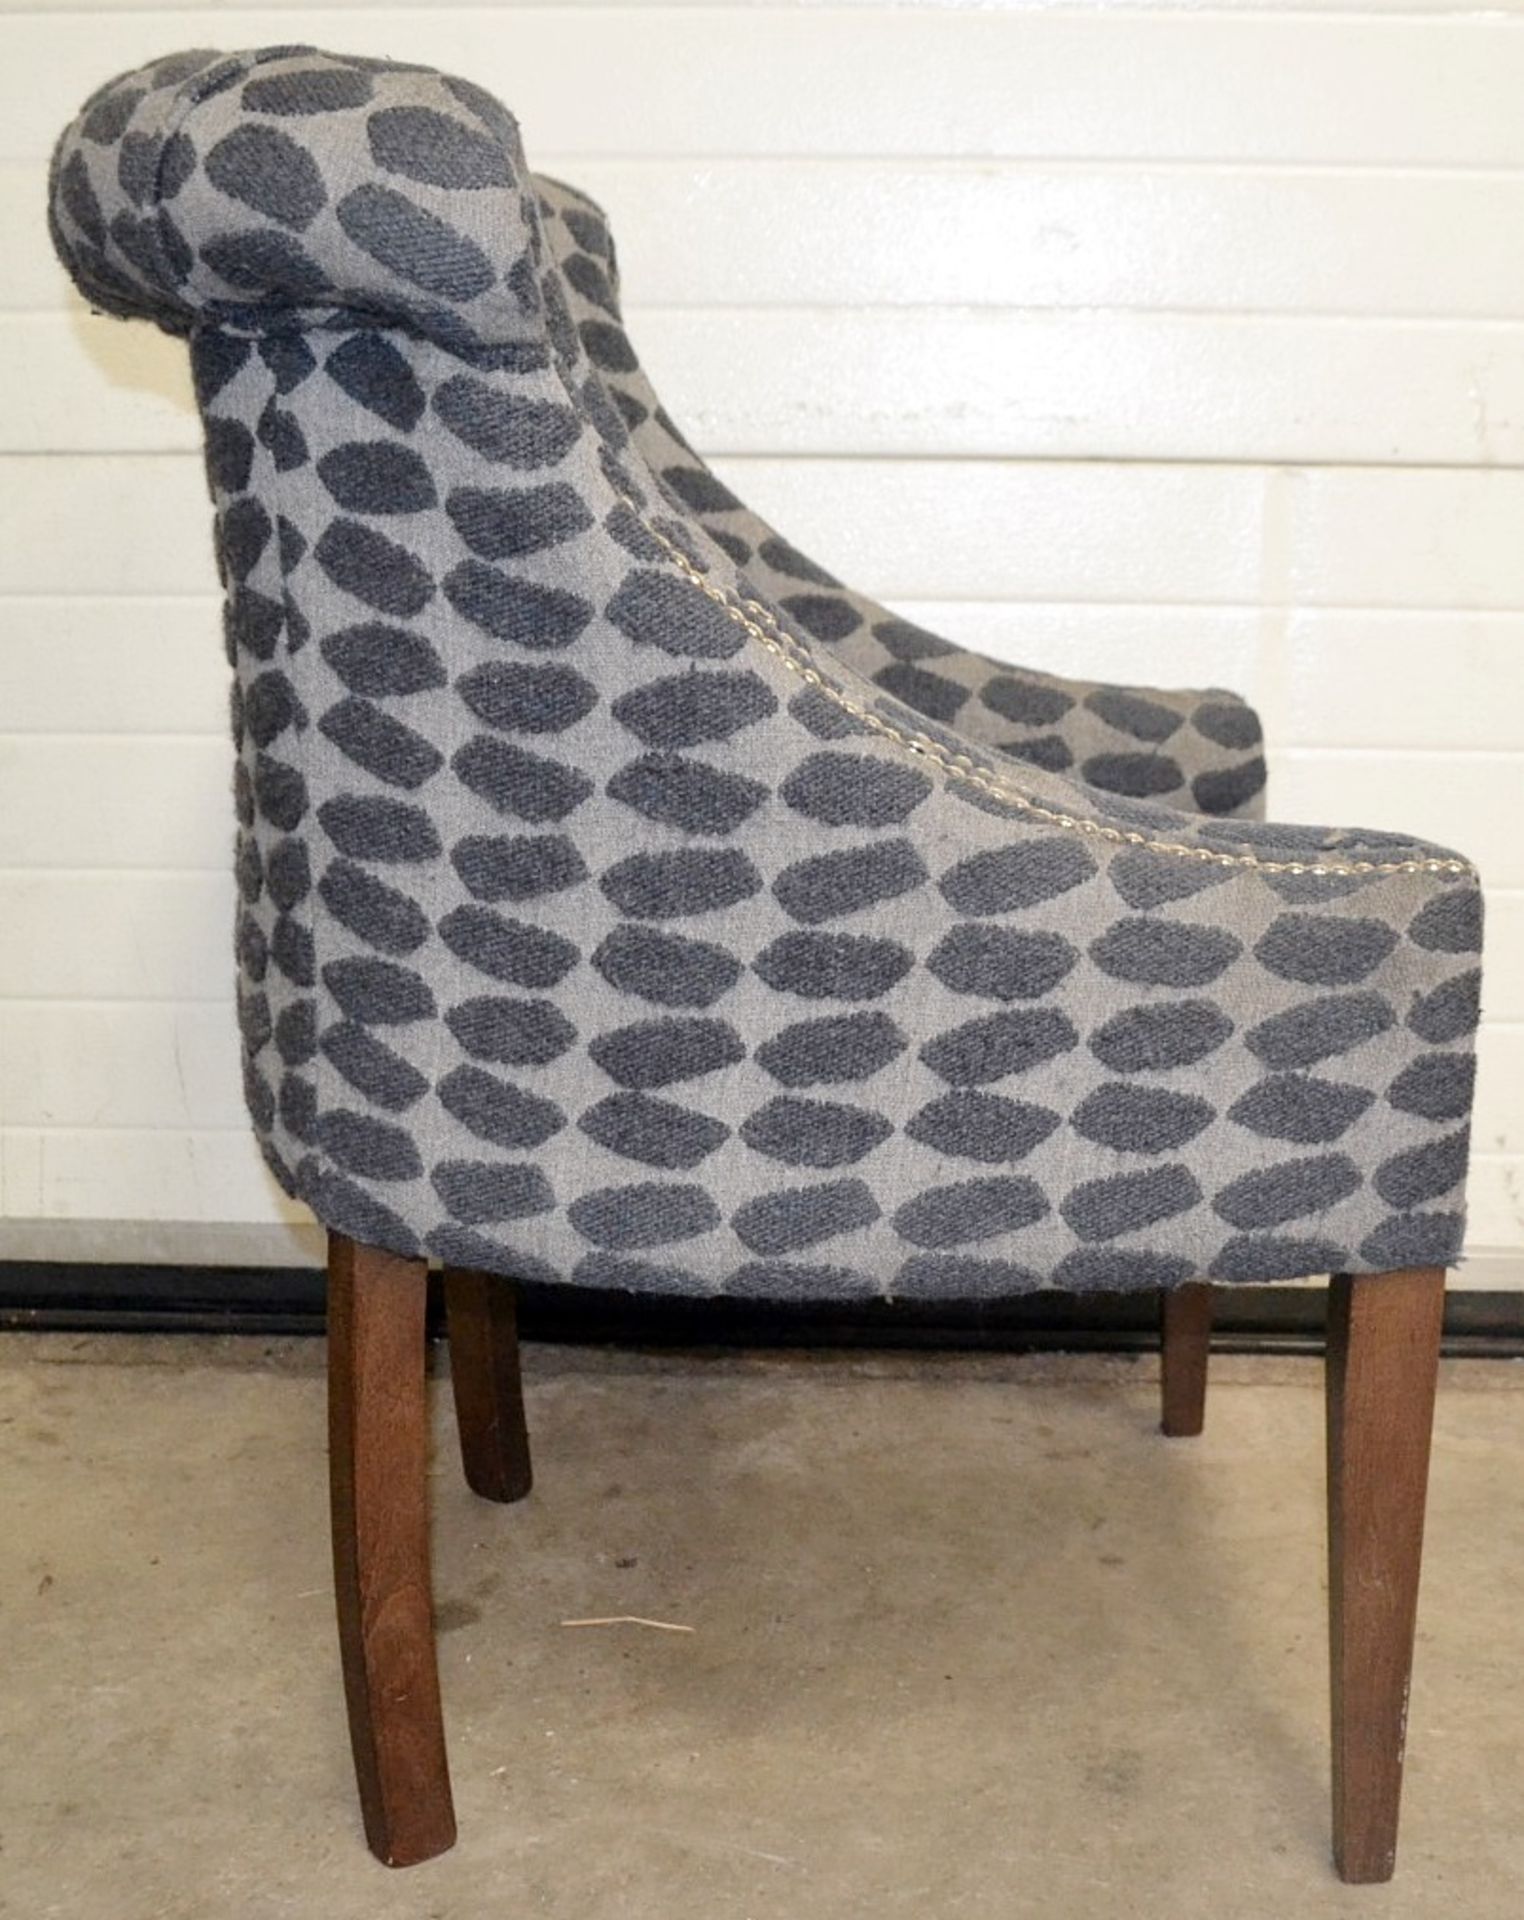 4 x Blue & Grey Upholstered Bar Chairs For Commercial Use - Dimensions (cm): W70 x D60, Back - Image 6 of 6